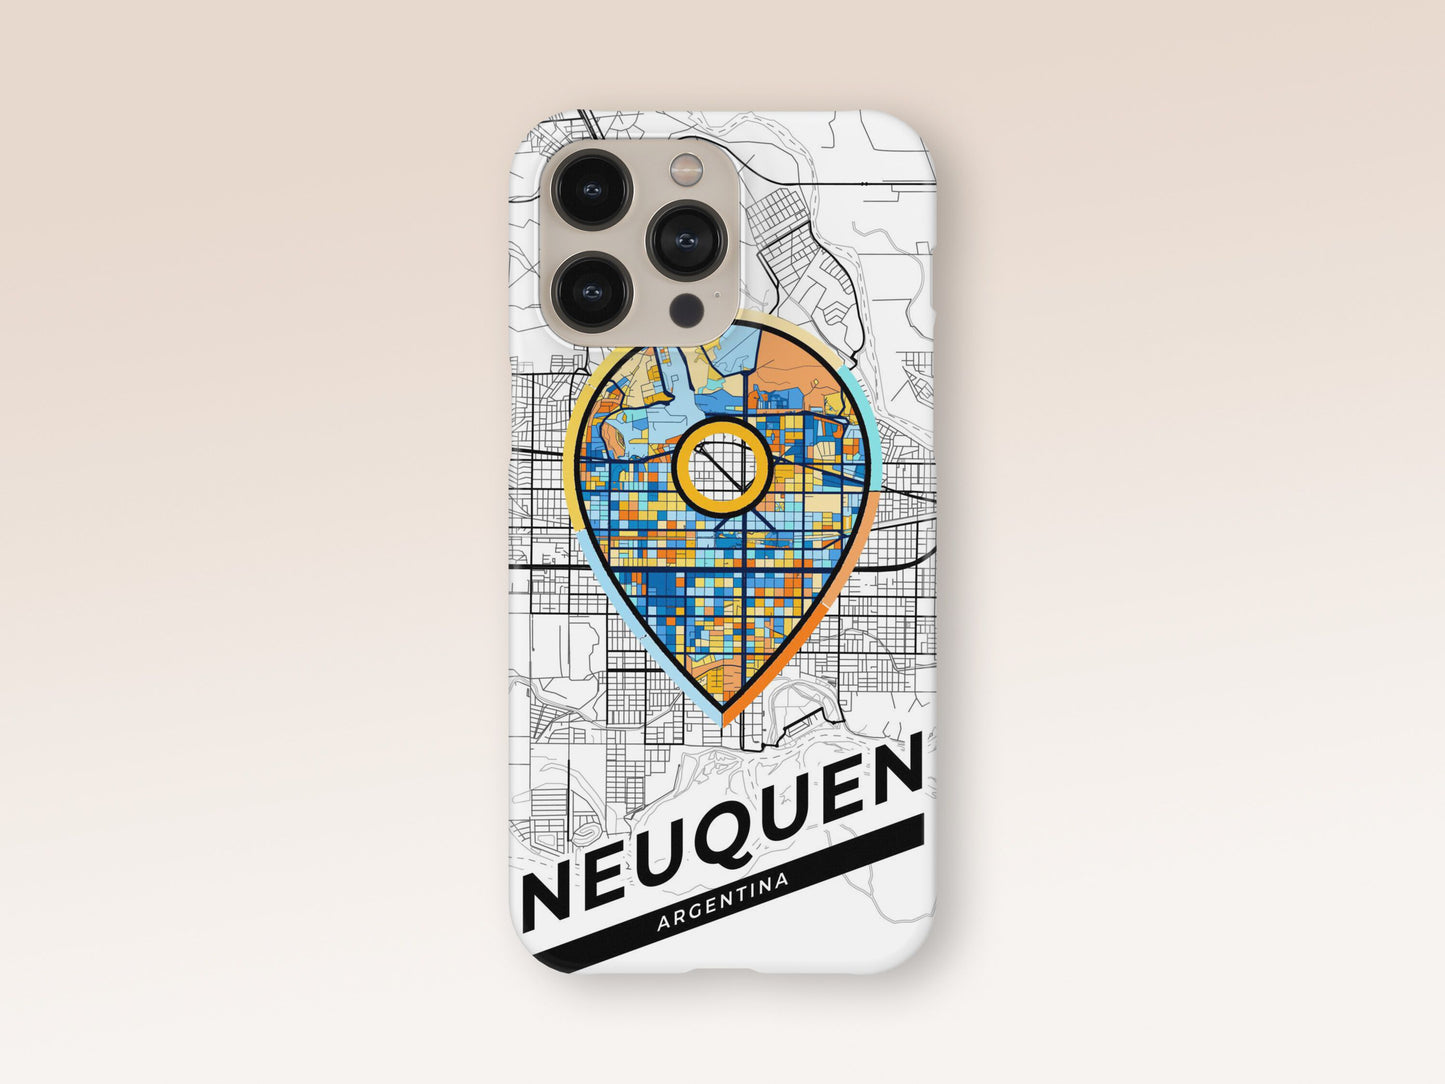 Neuquen Argentina slim phone case with colorful icon 1